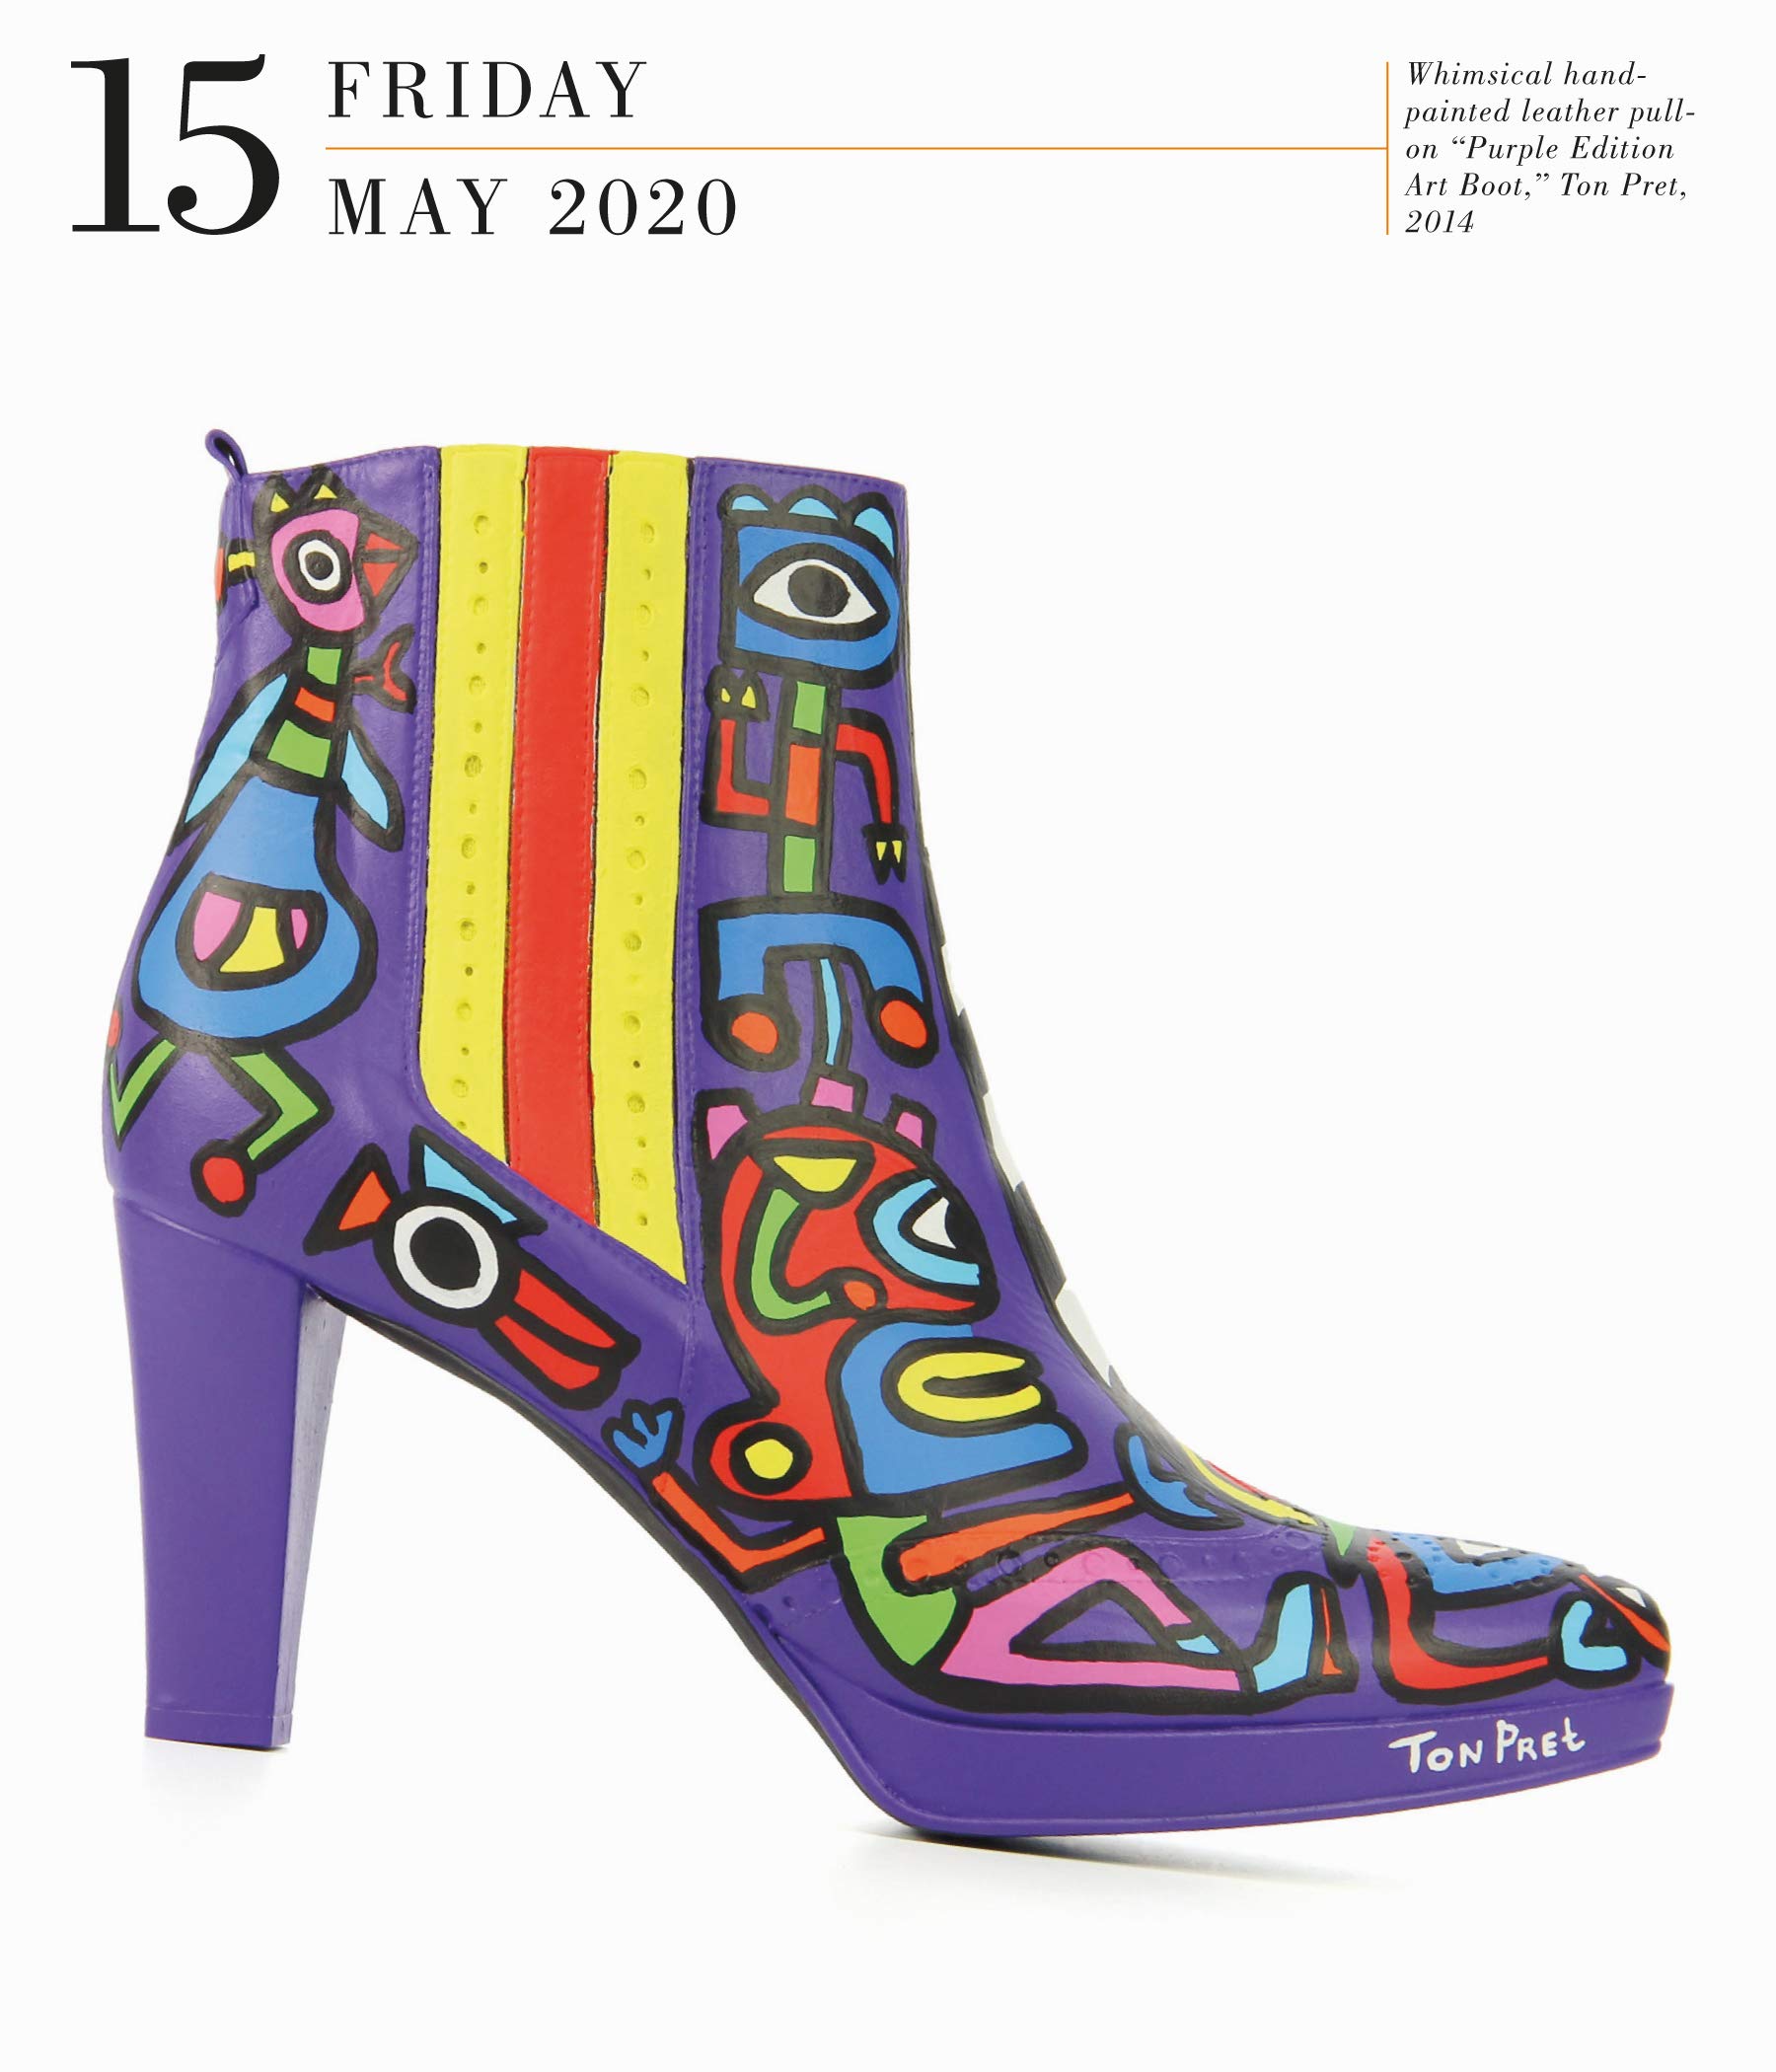 calendar-2020-page-a-day-gallery-calendar-shoes-workman-publishing